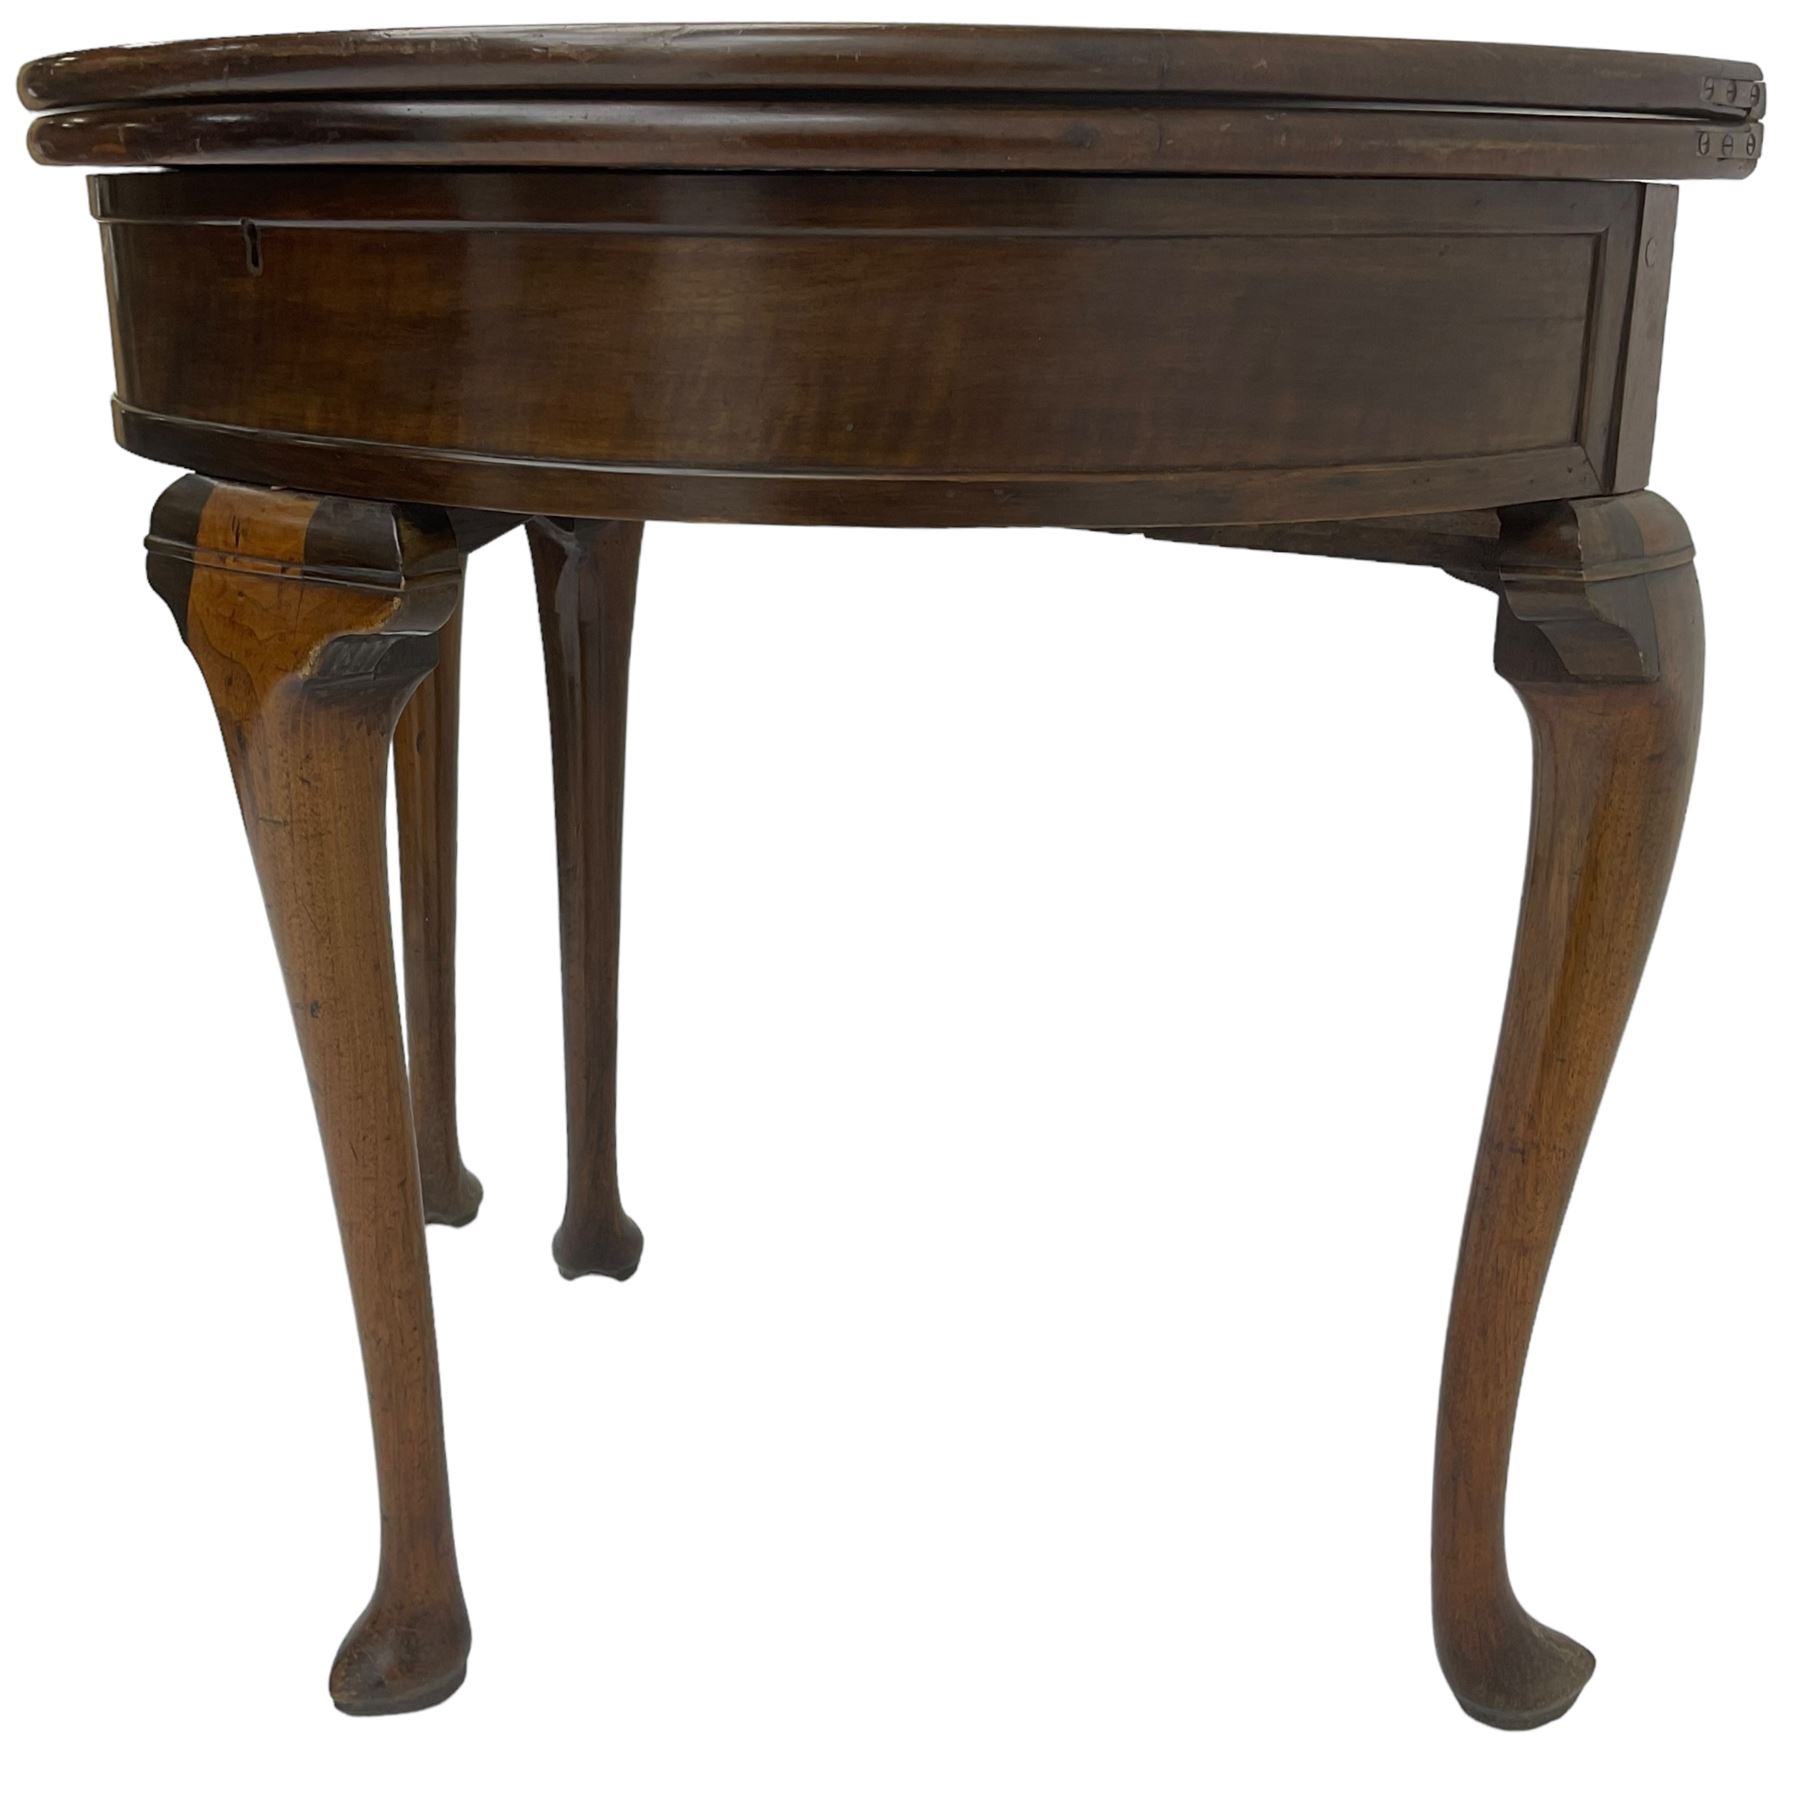 19th century walnut demi-lune side table - Image 5 of 6